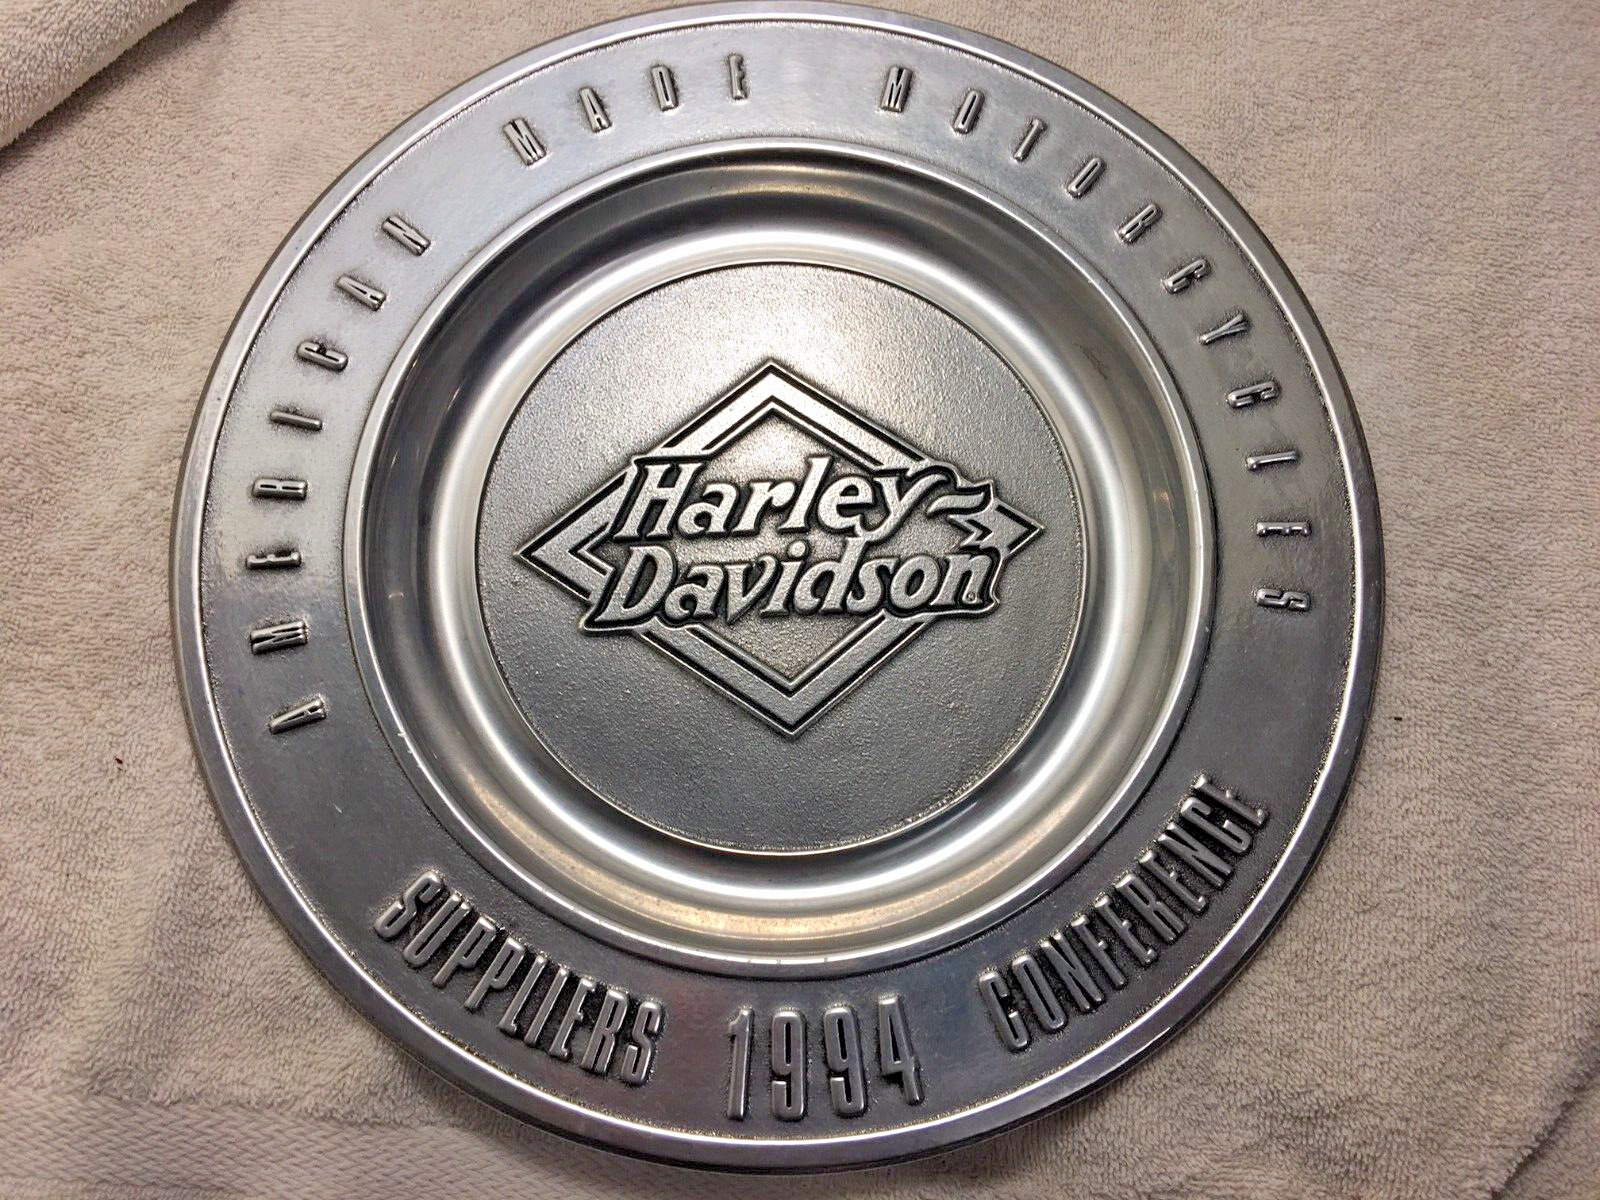 Harley Davidson 1994 Supplier's Conference Wilton Armetale Plate